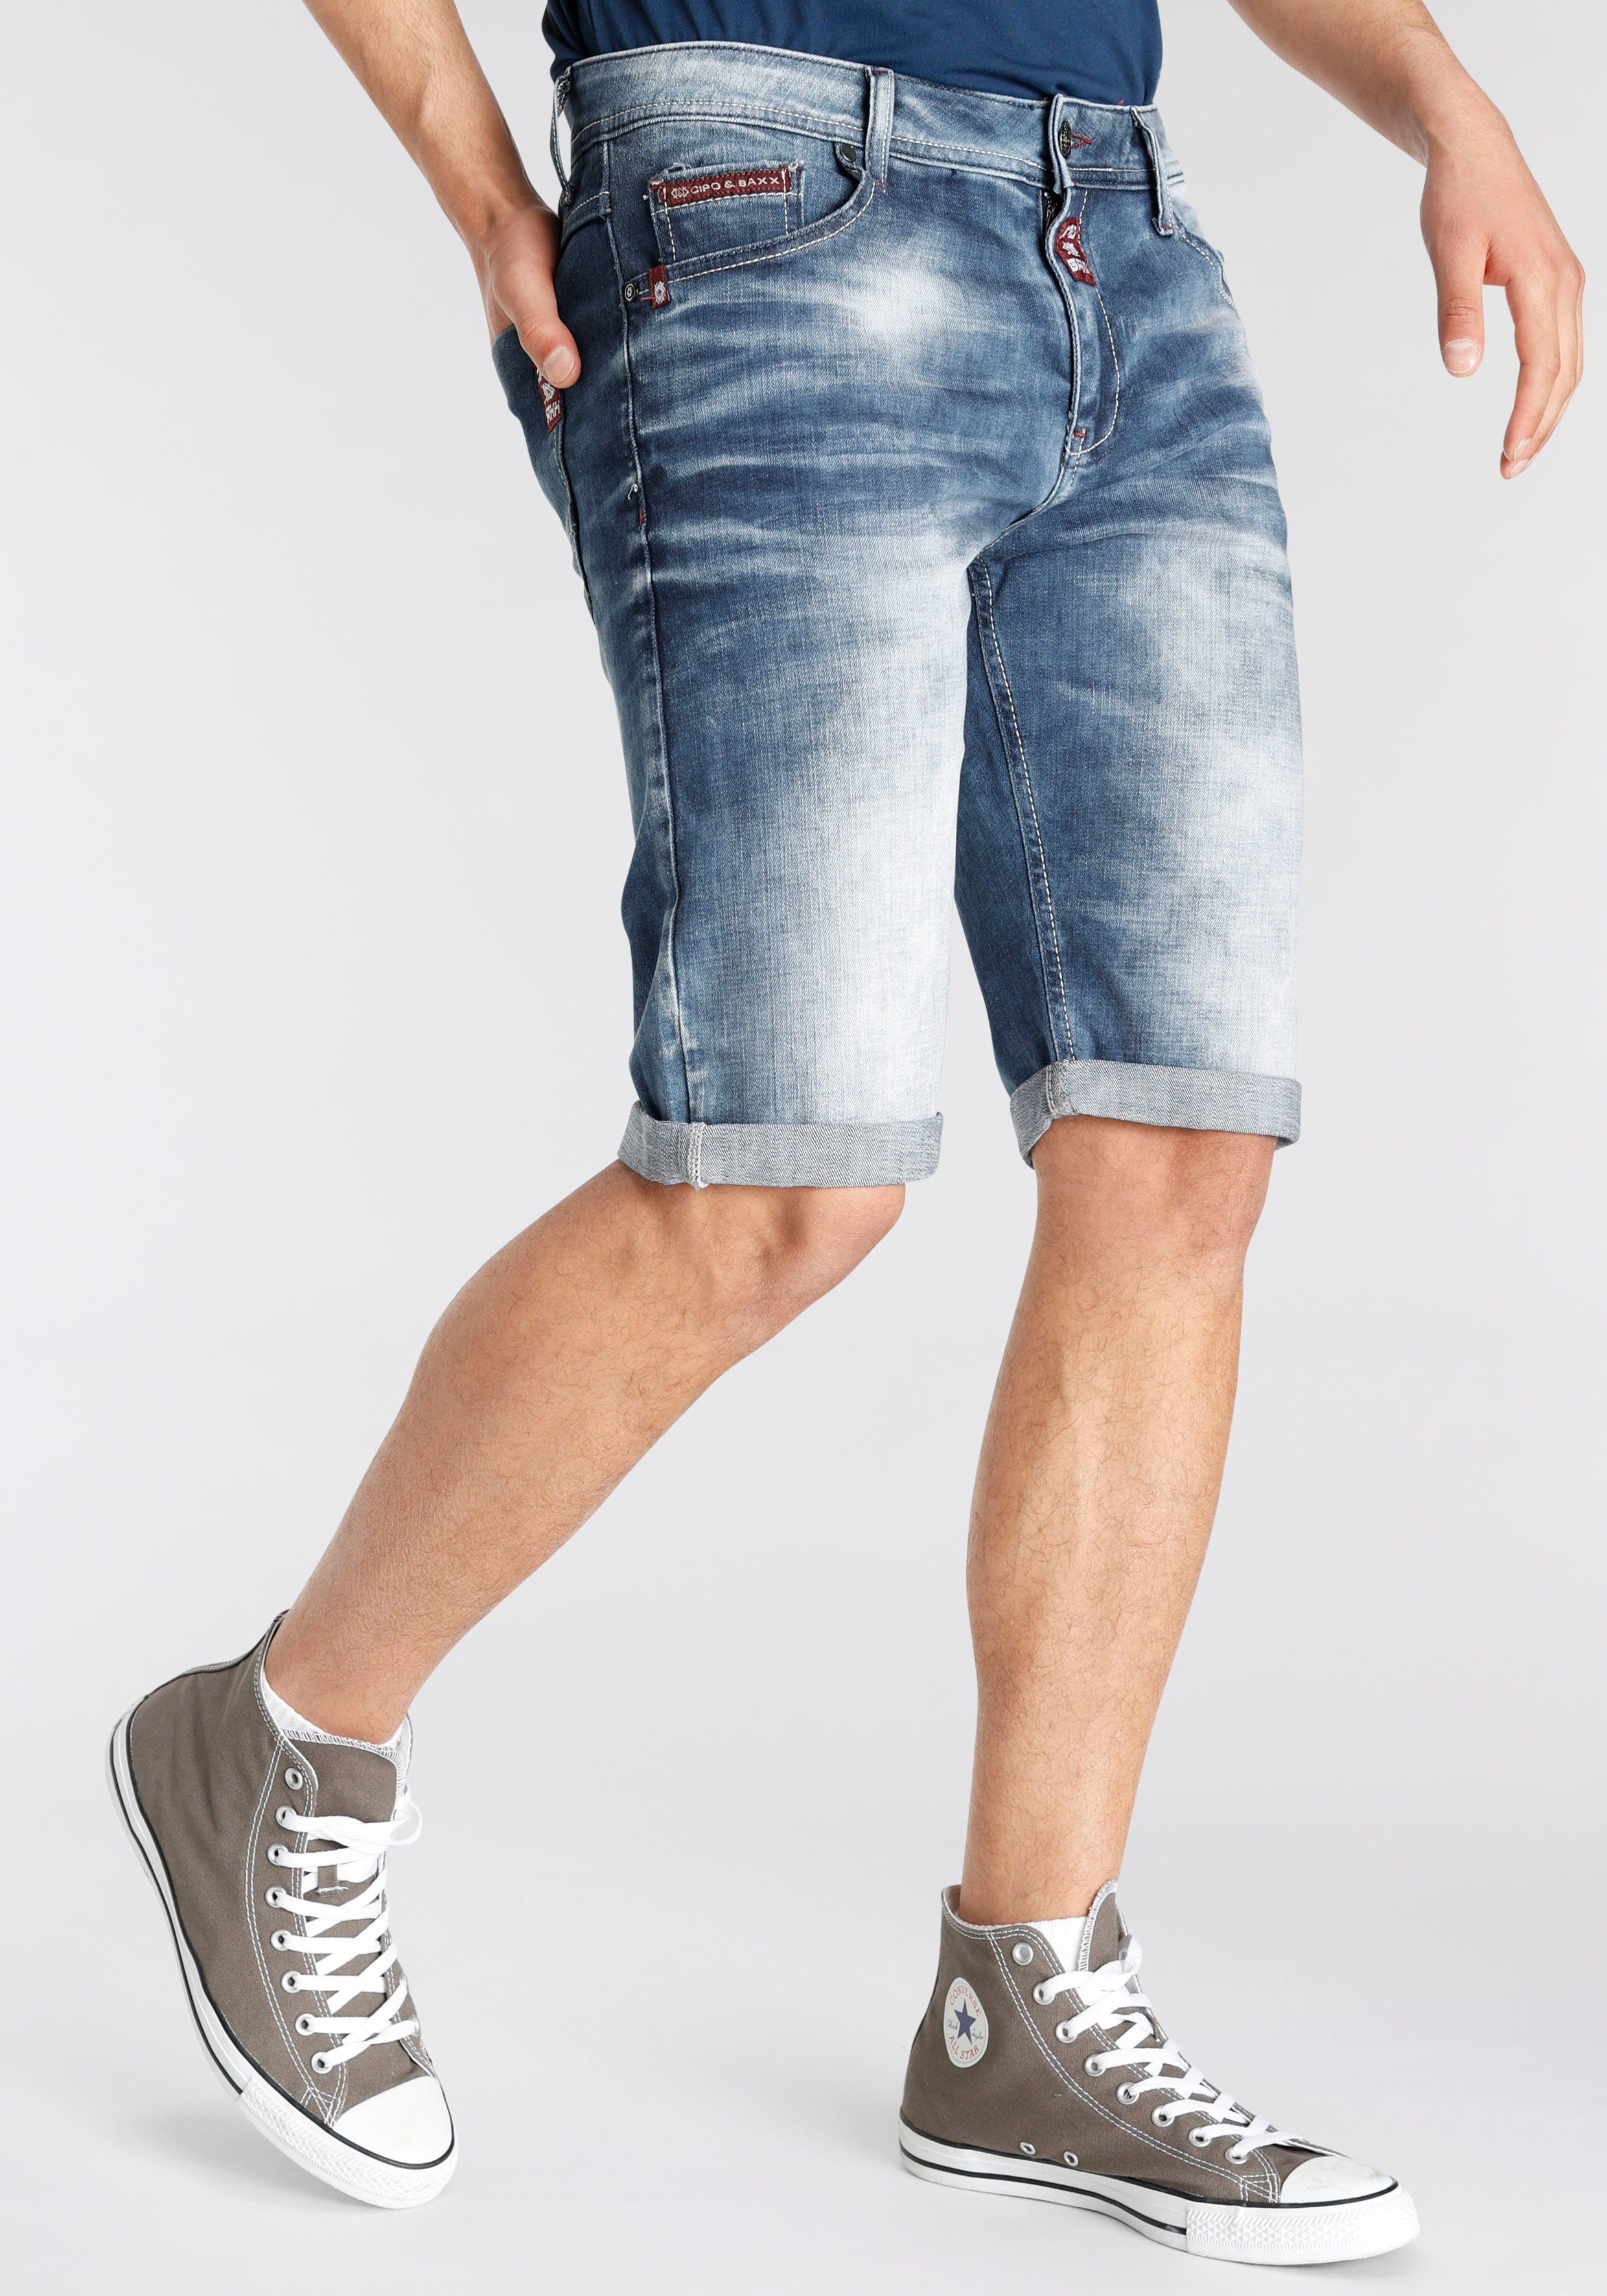 Baxx blue & Cipo used Jeansshorts